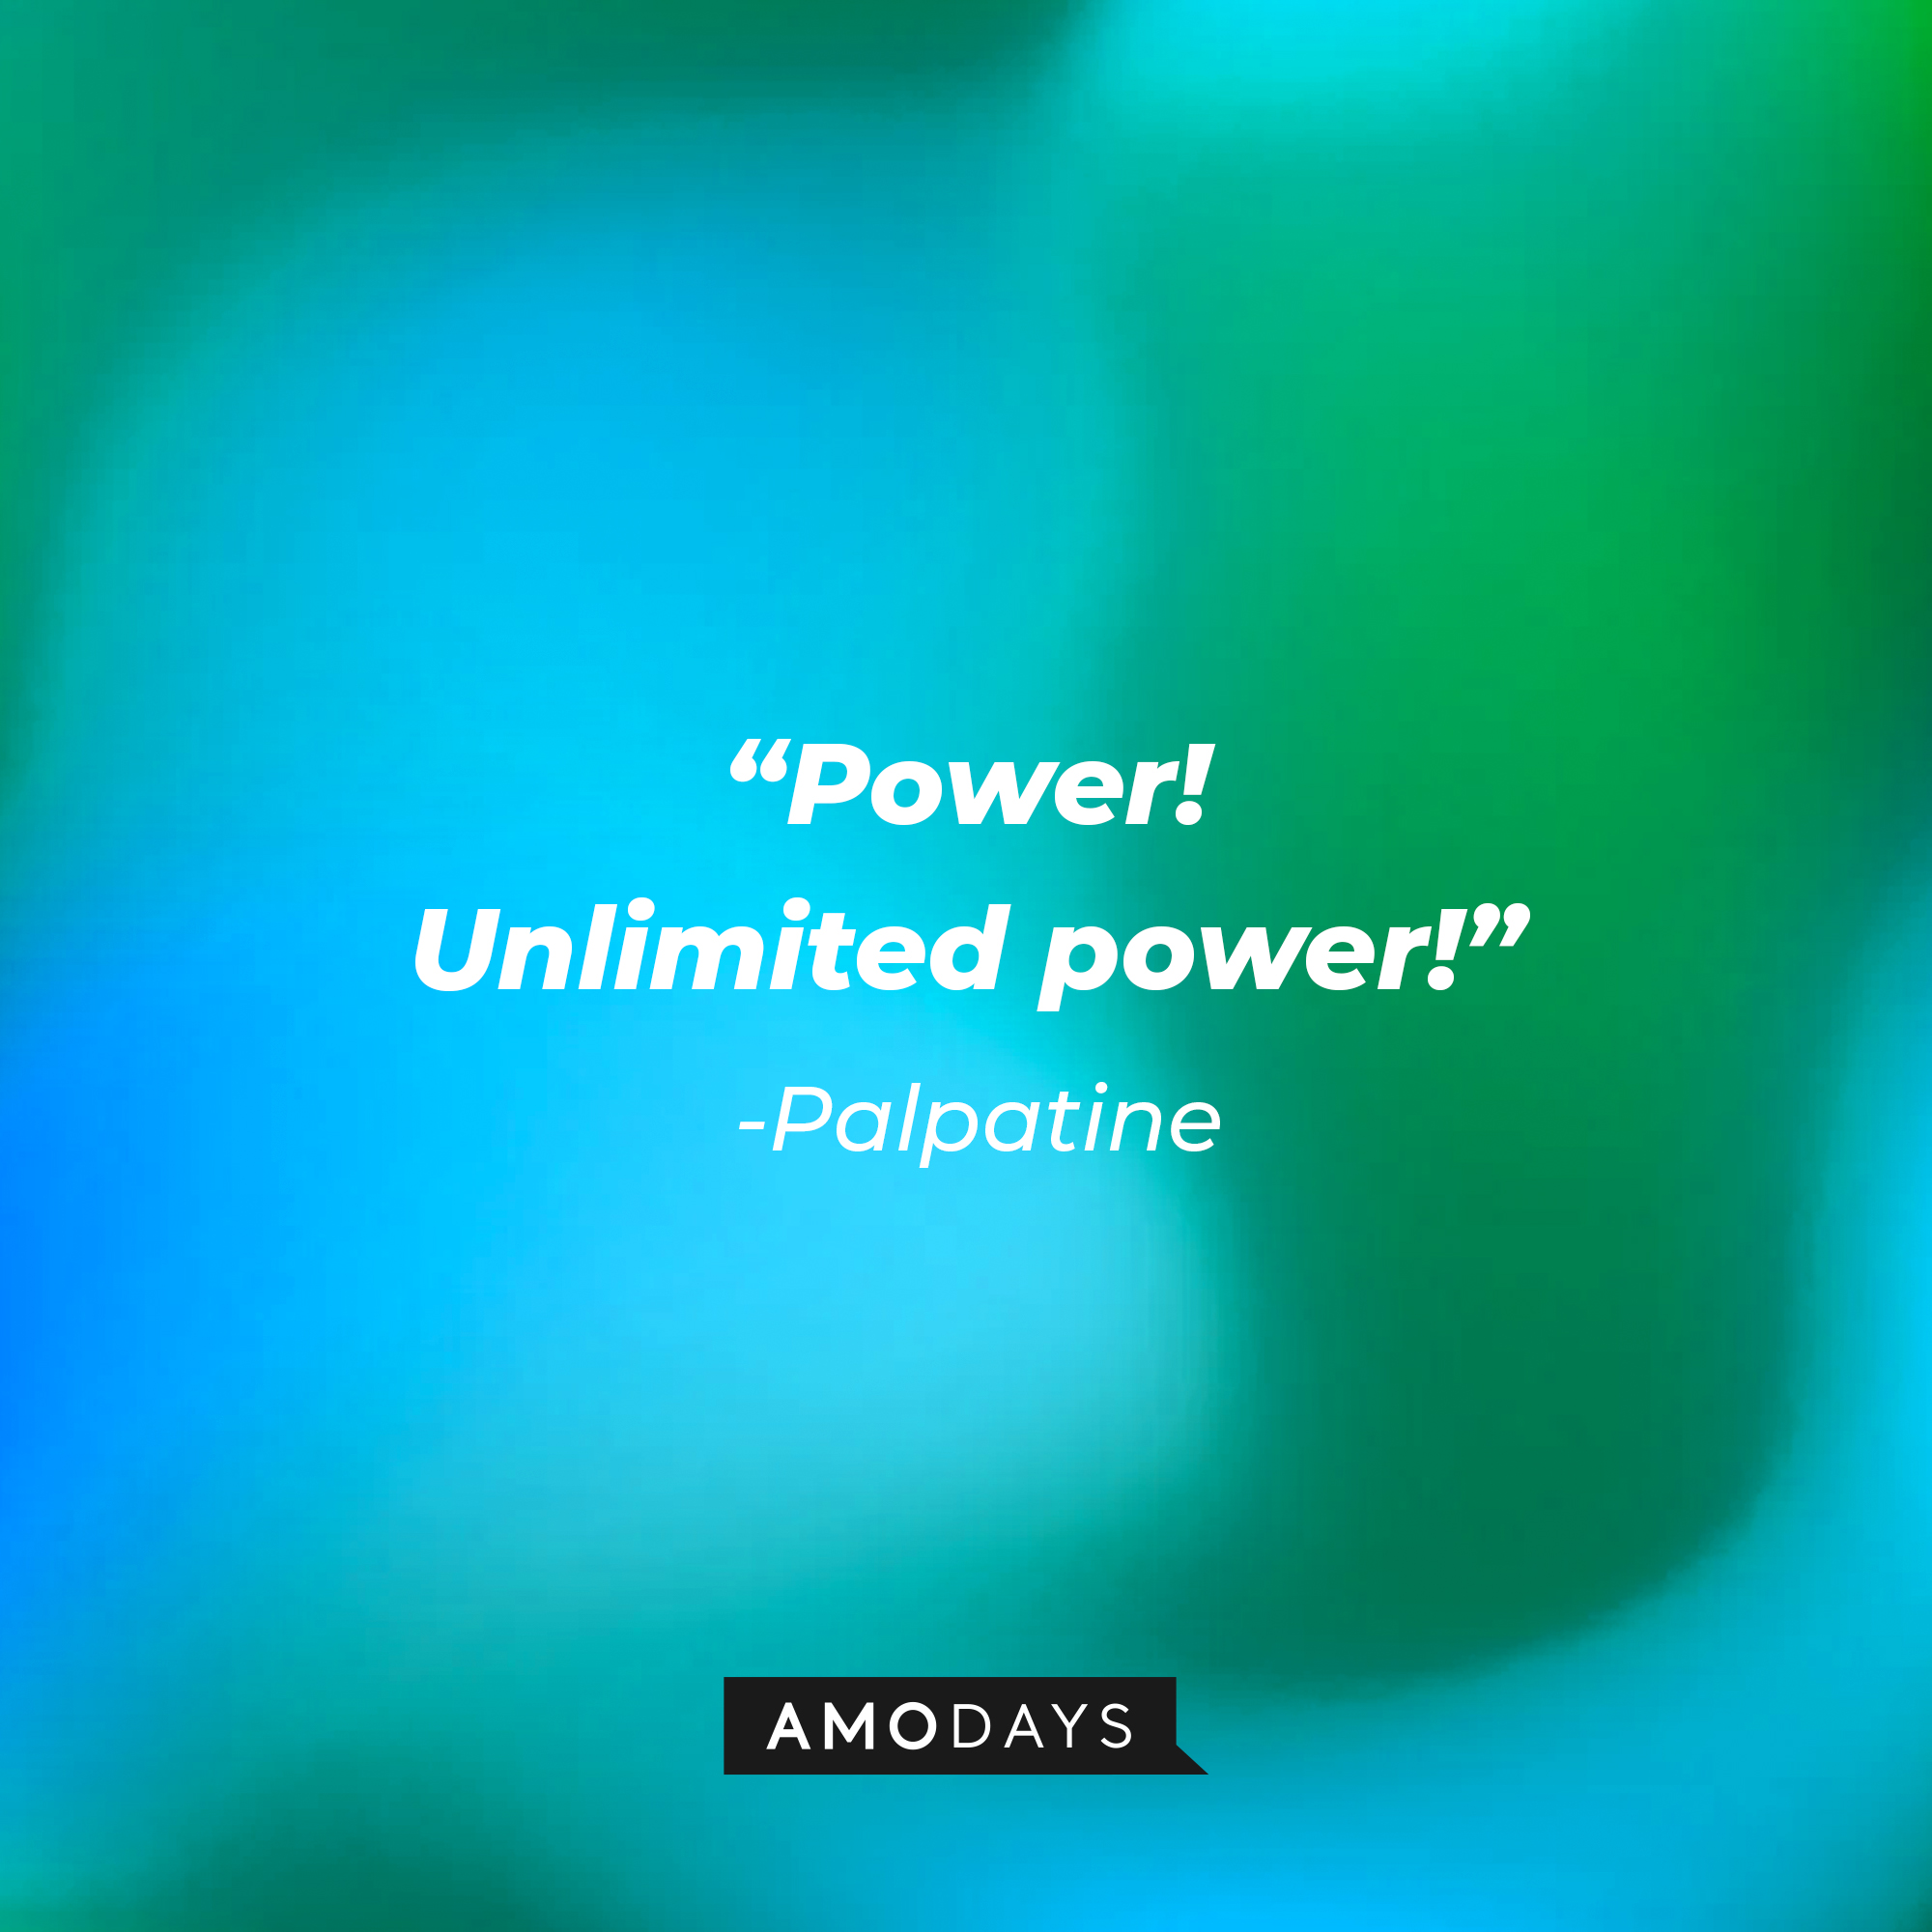 Palpatine’s quote: “Power! Unlimited power!” | Source: AmoDays